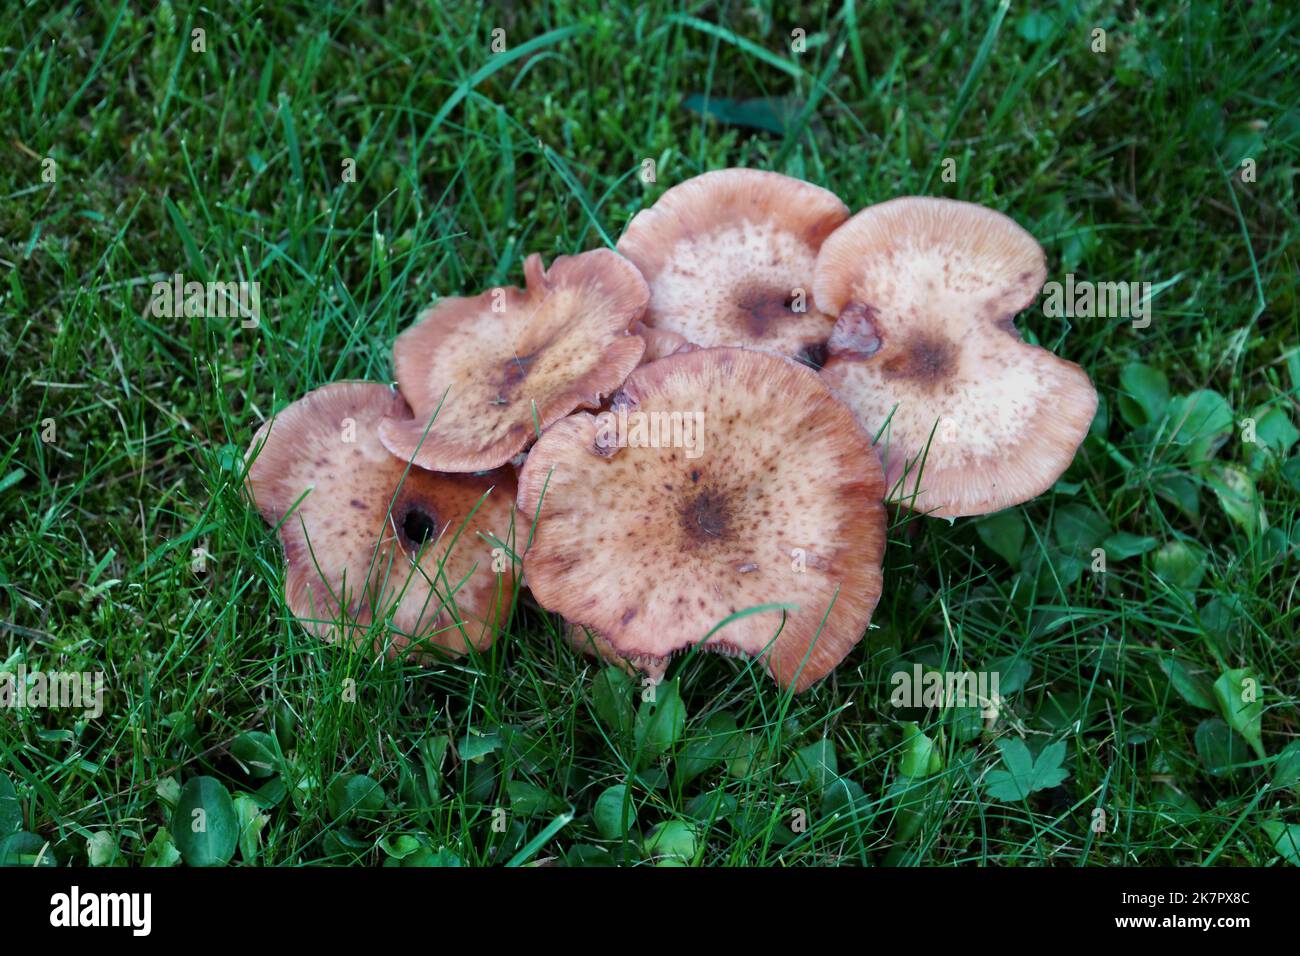 Mushrooms as nuisance fungi in the lawn. One of the poisonous fungi types that can grow in the grassland. Stock Photo